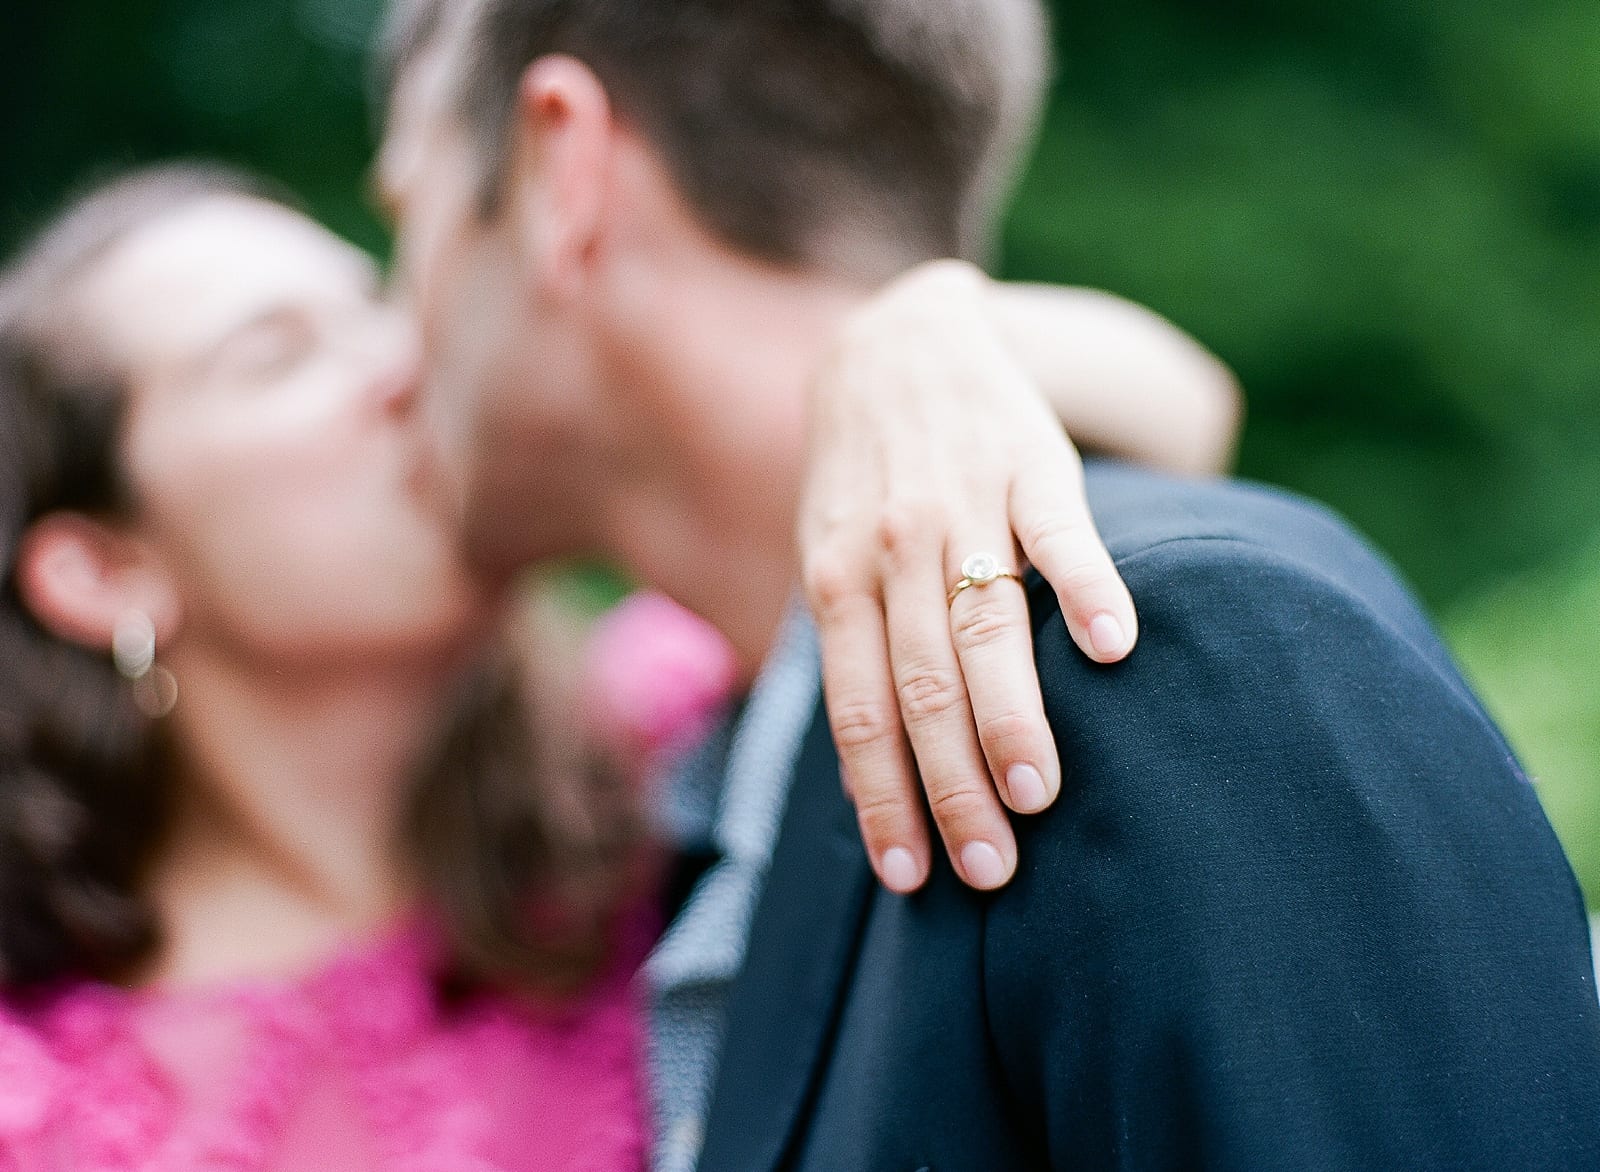 Couple Kissing With Her Ring Hand on His Shoulder Photo